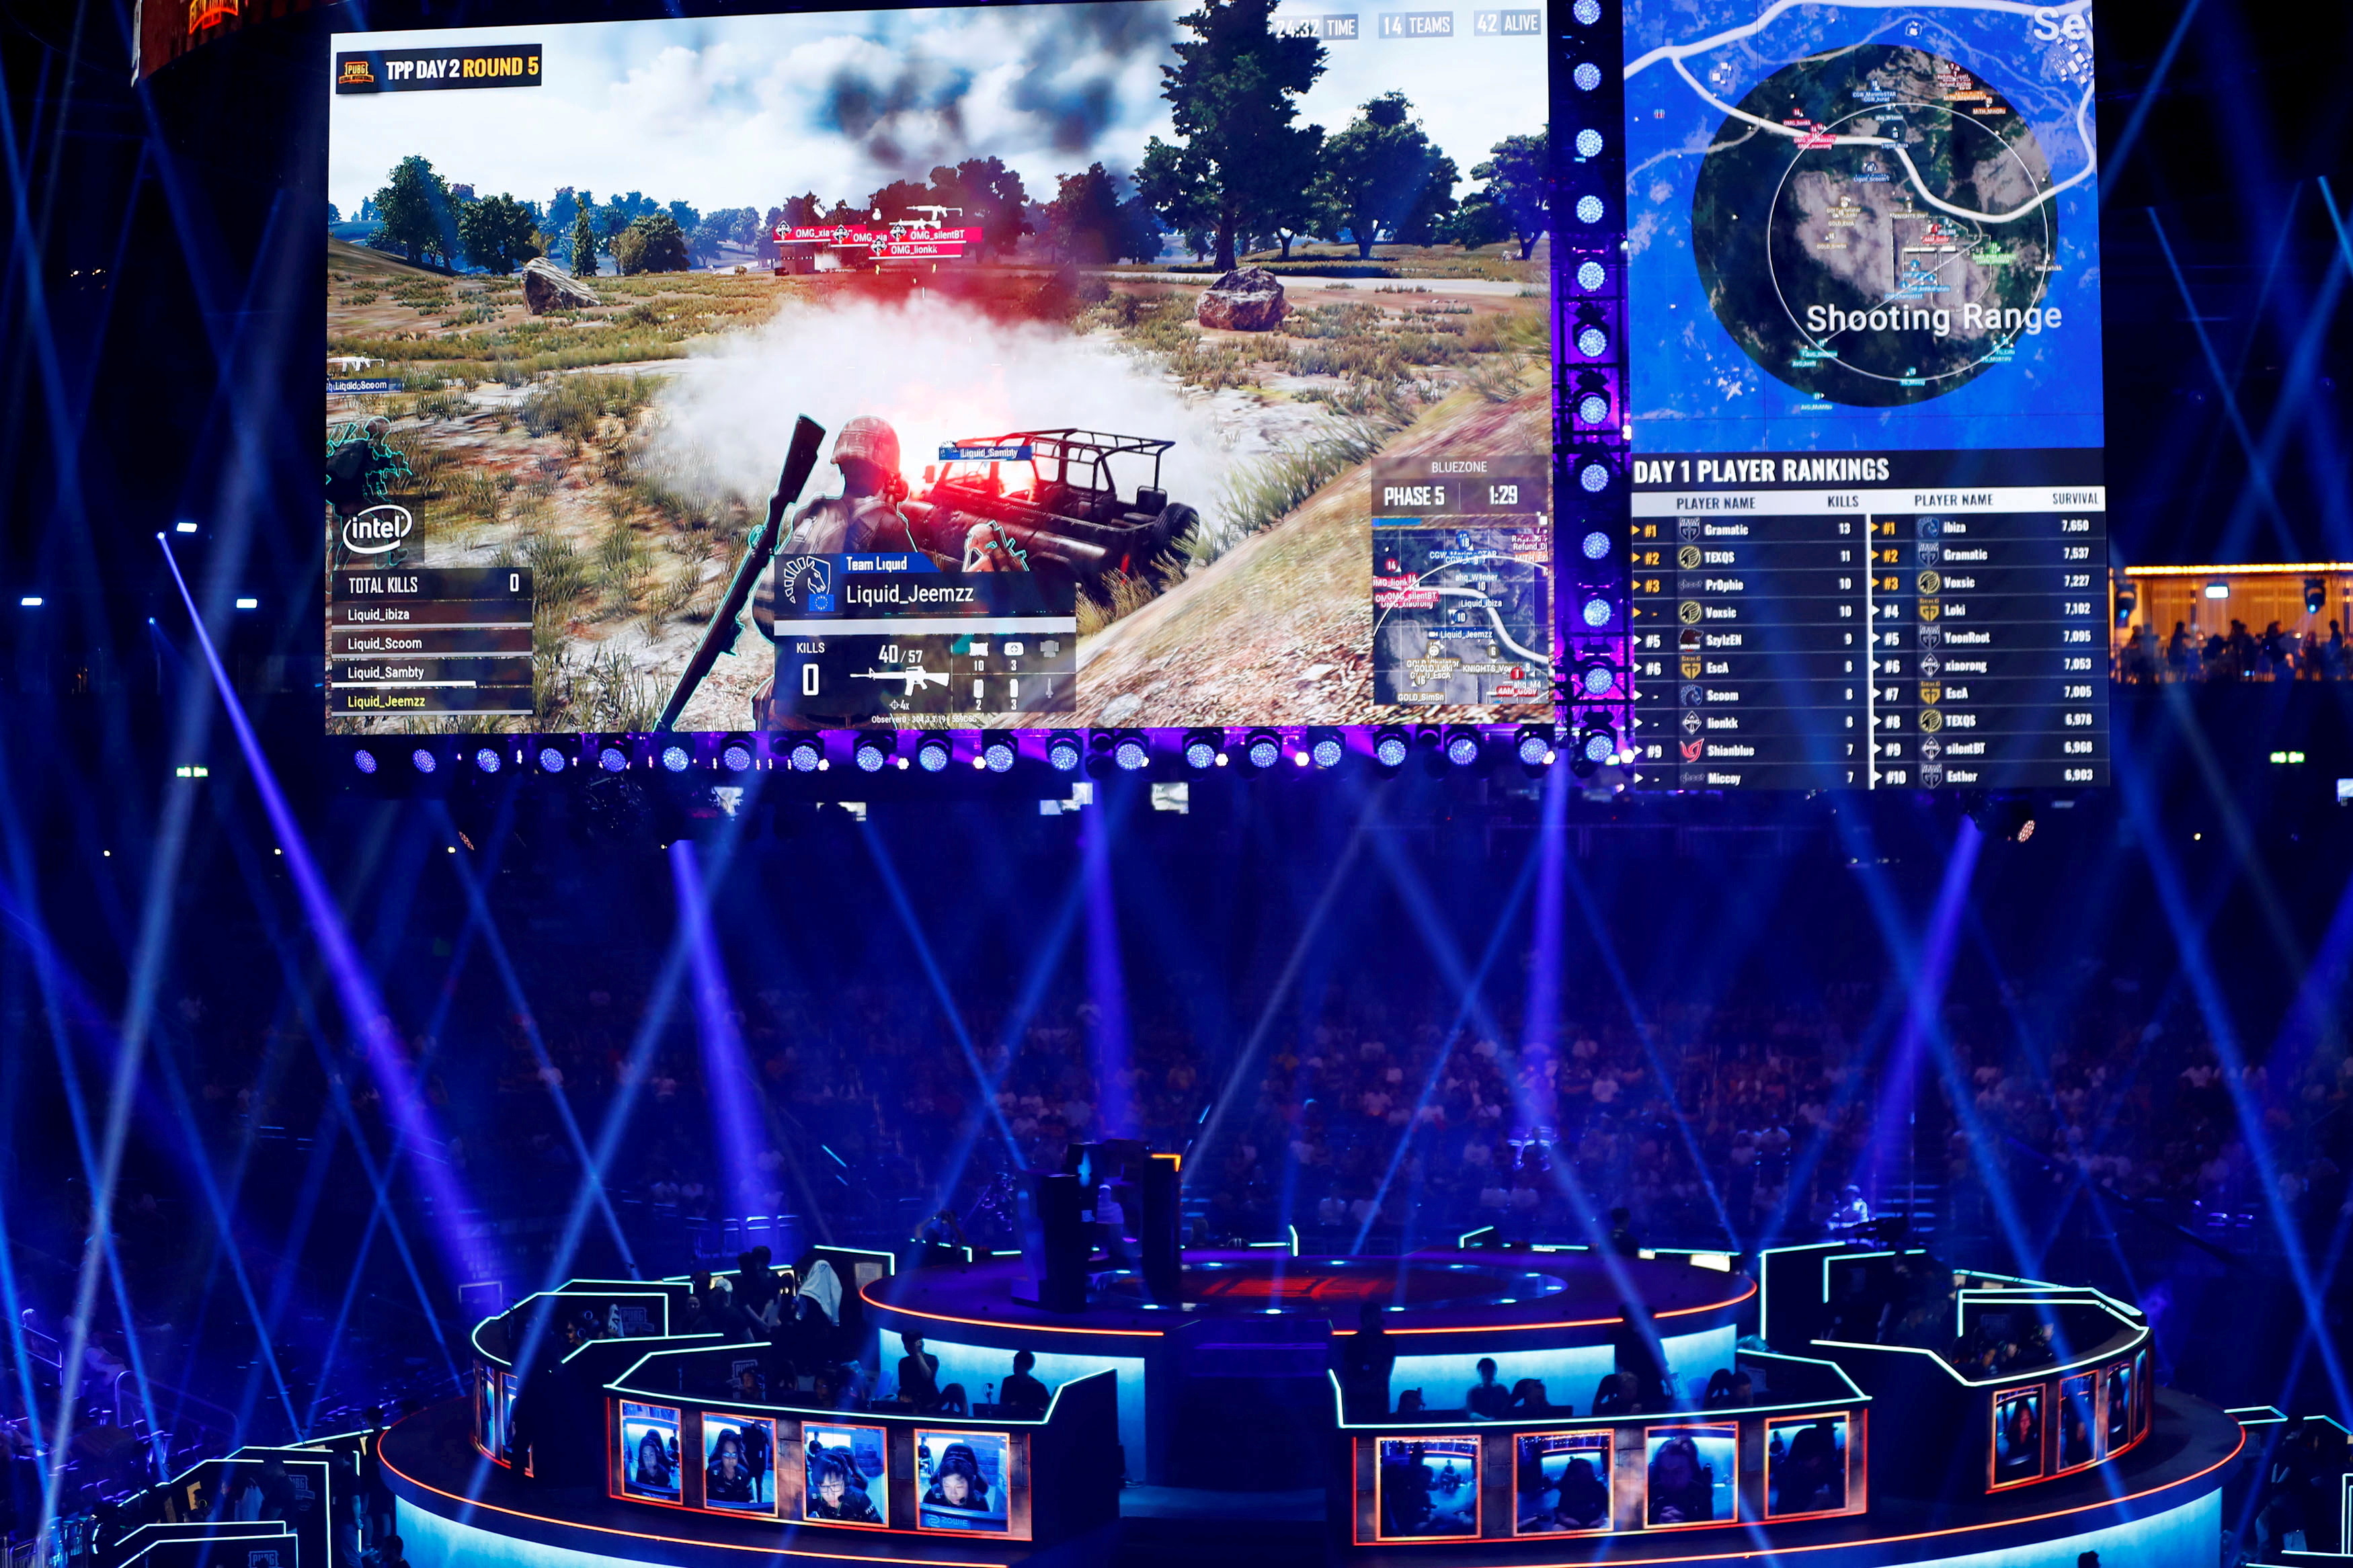 Players are pictured as they attend the PUBG Global Invitational 2018, the first official esports tournament for the computer game PlayerUnknown's Battlegrounds in Berlin